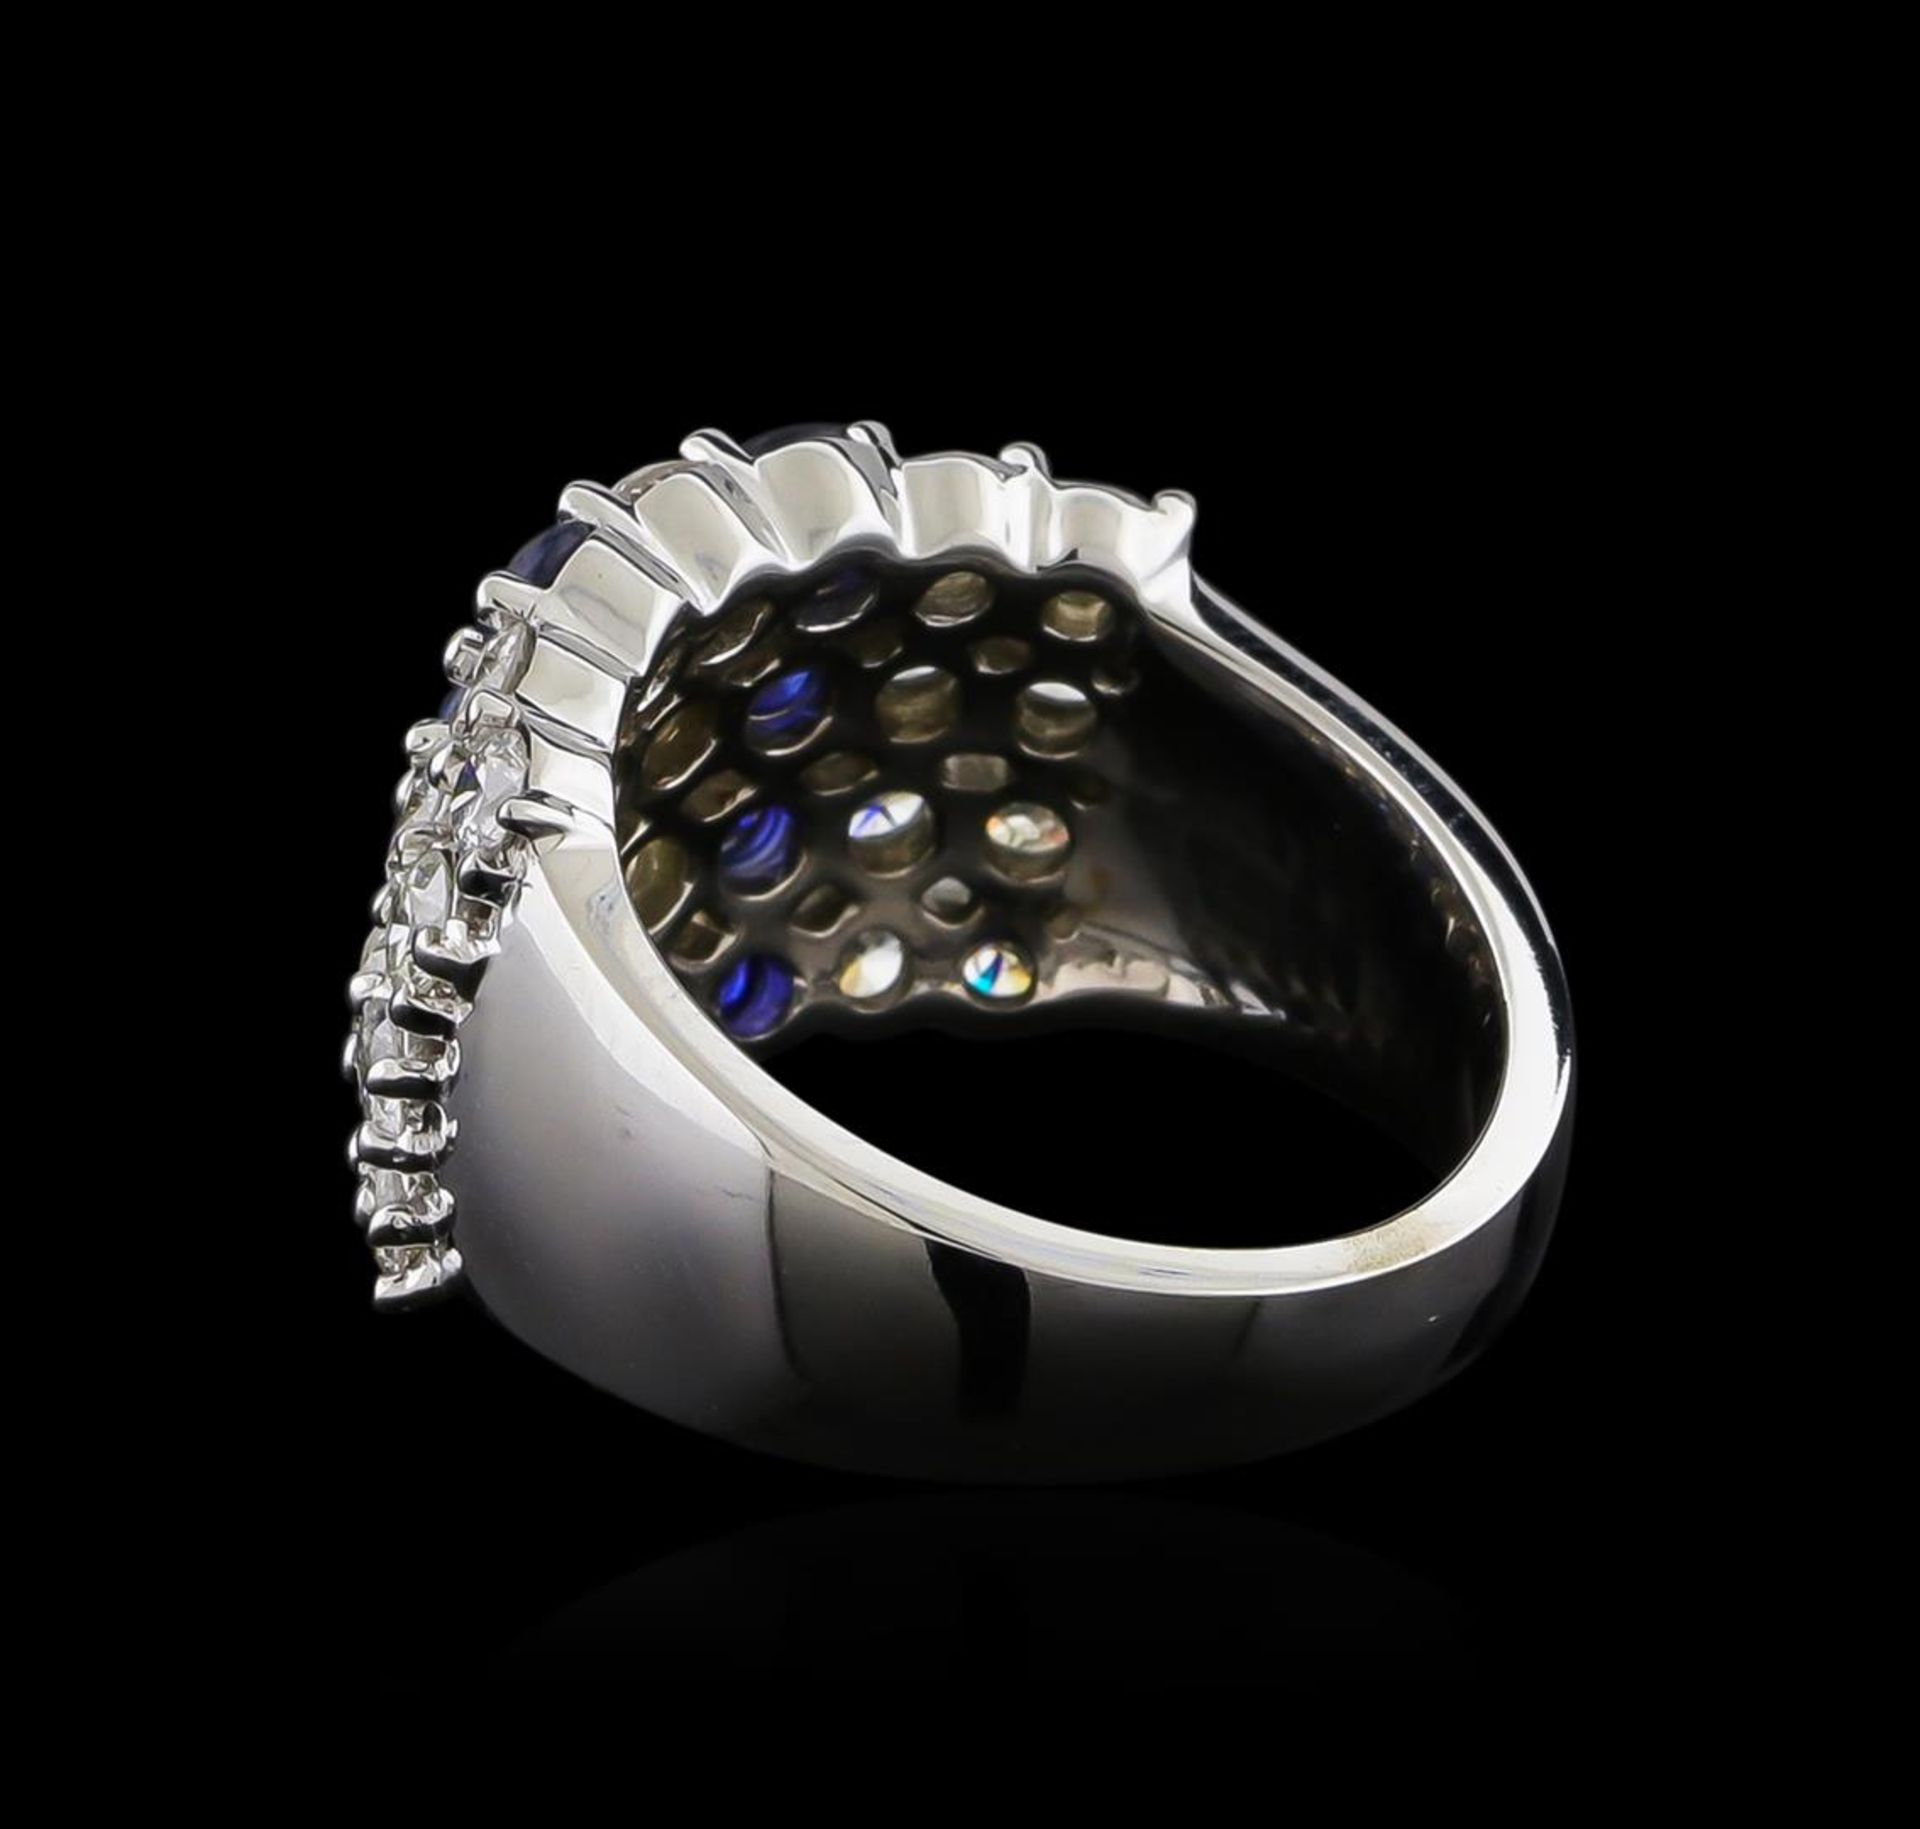 1.16 ctw Sapphire and Diamond Ring - 14KT White Gold - Image 3 of 5